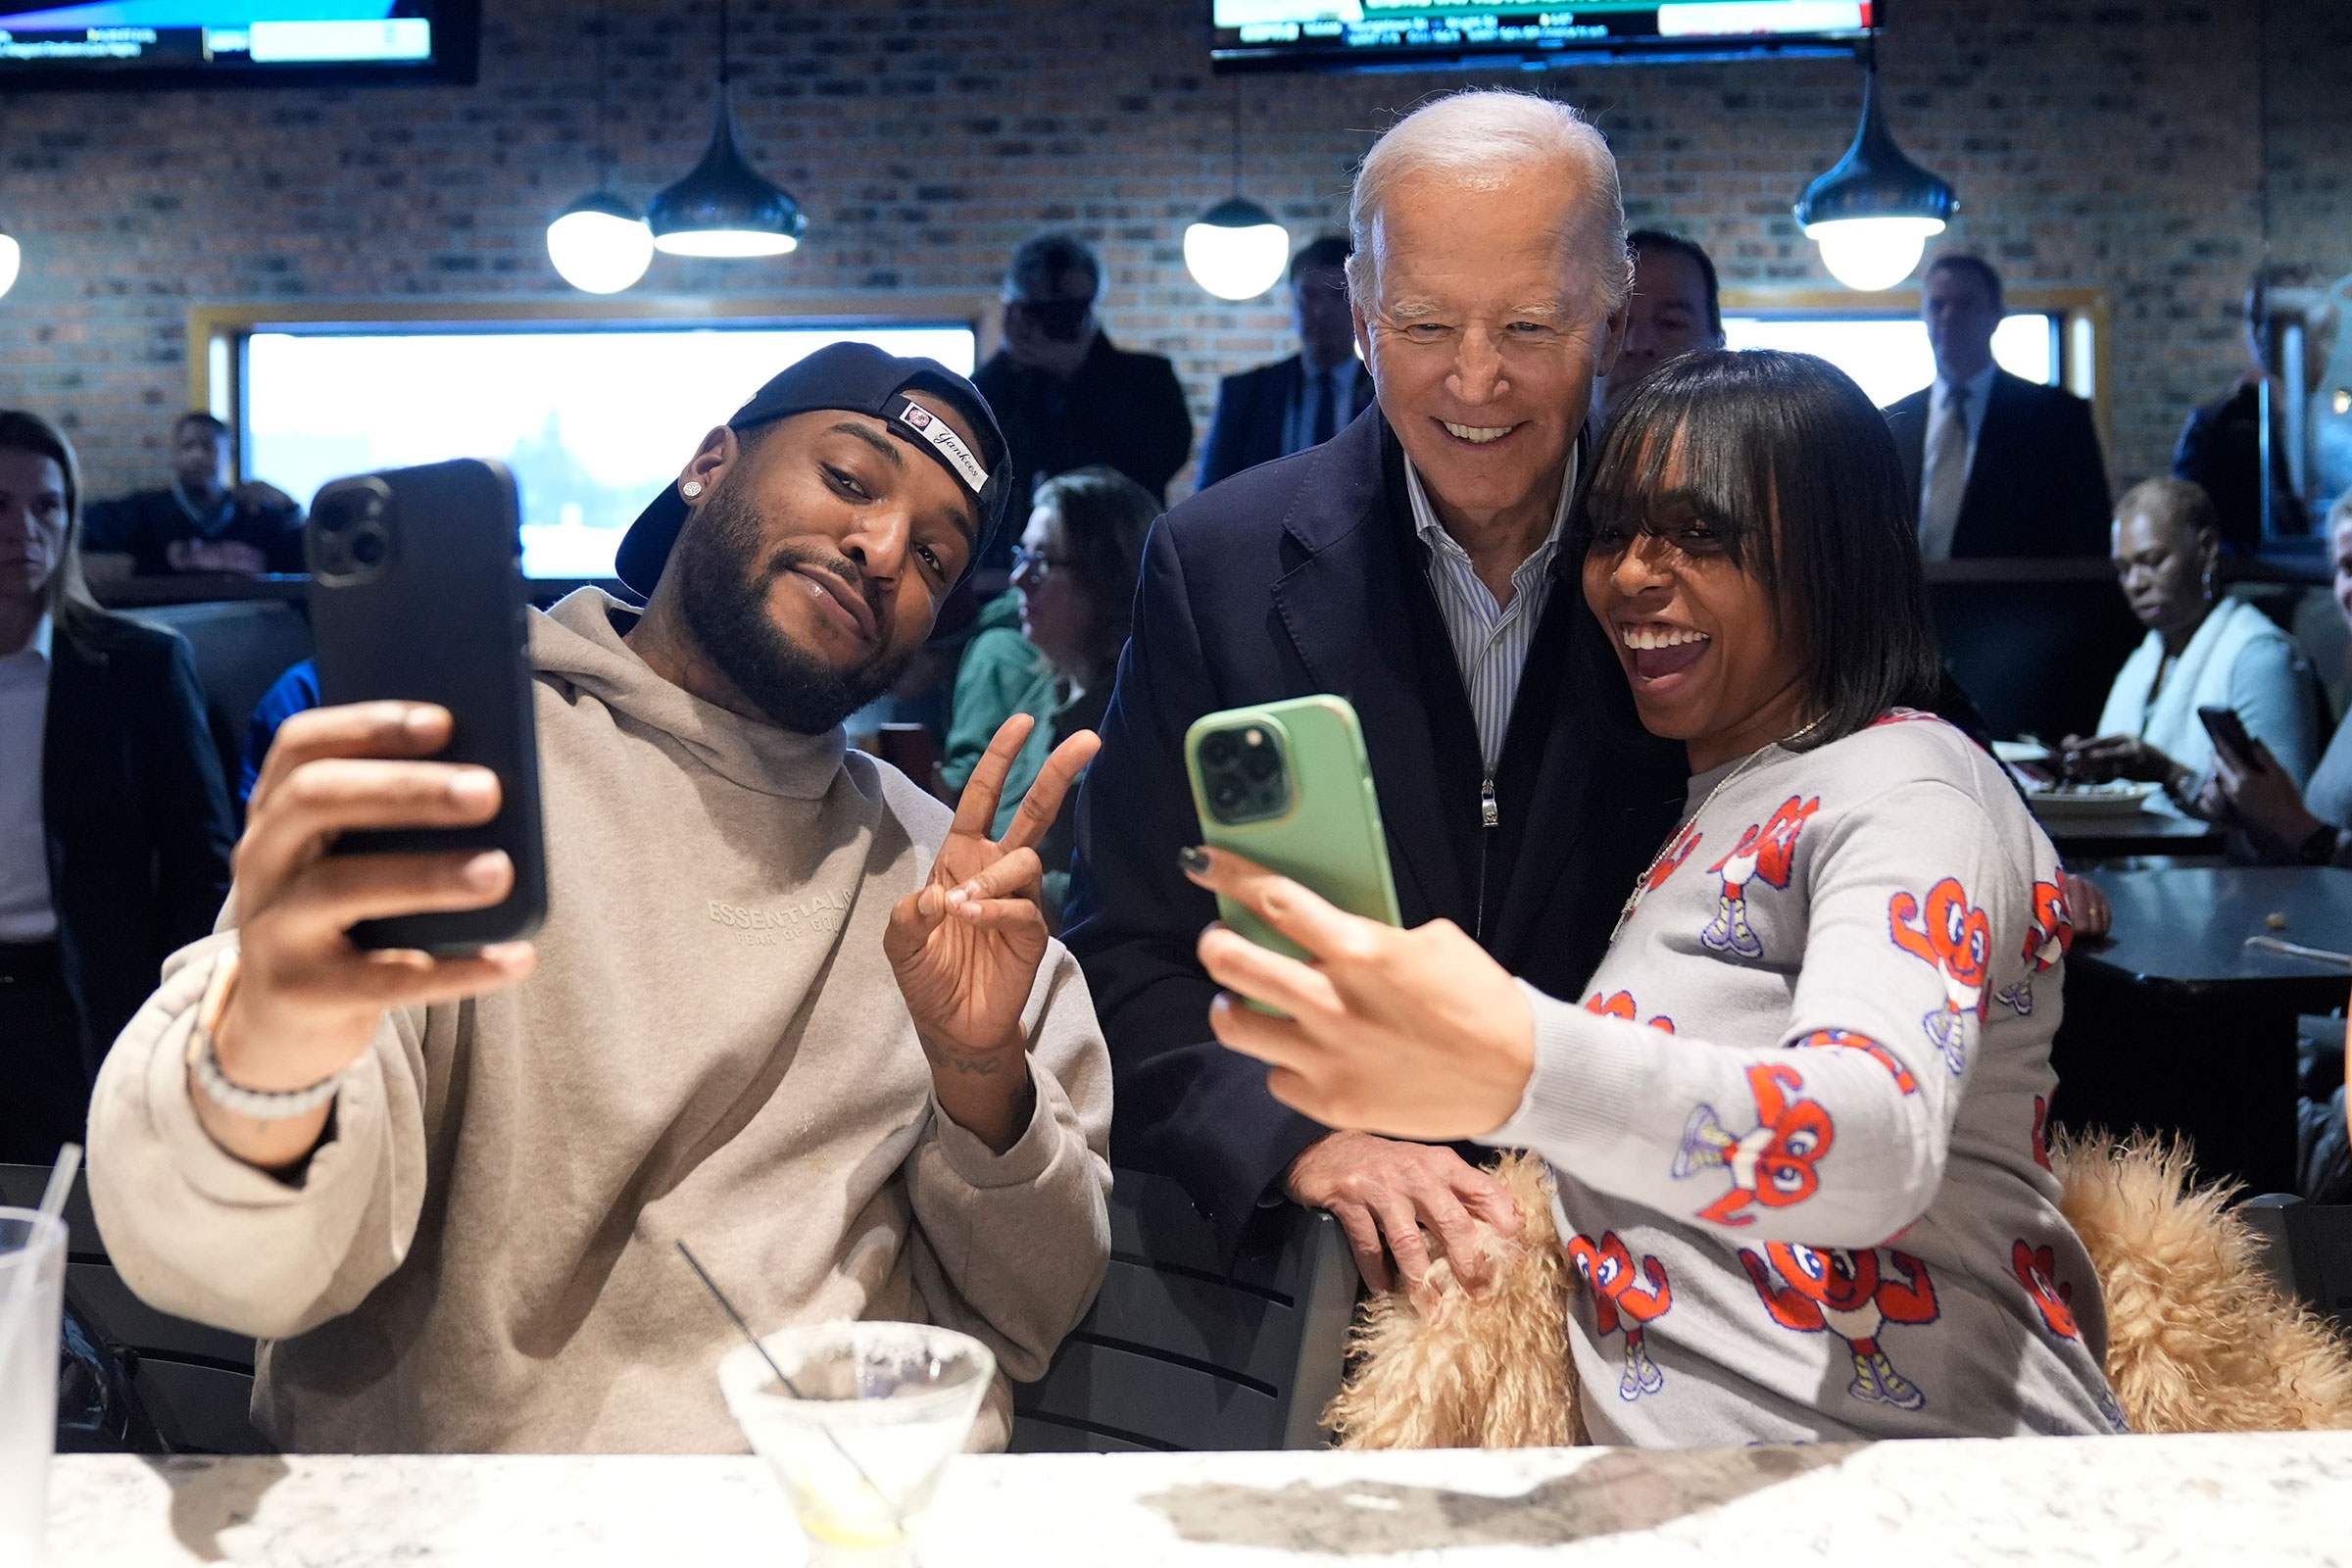 President Joe Biden, center, takes photos with patrons at They Say restaurant during a campaign stop Feb. 1, 2024, in Harper Woods, Michigan.